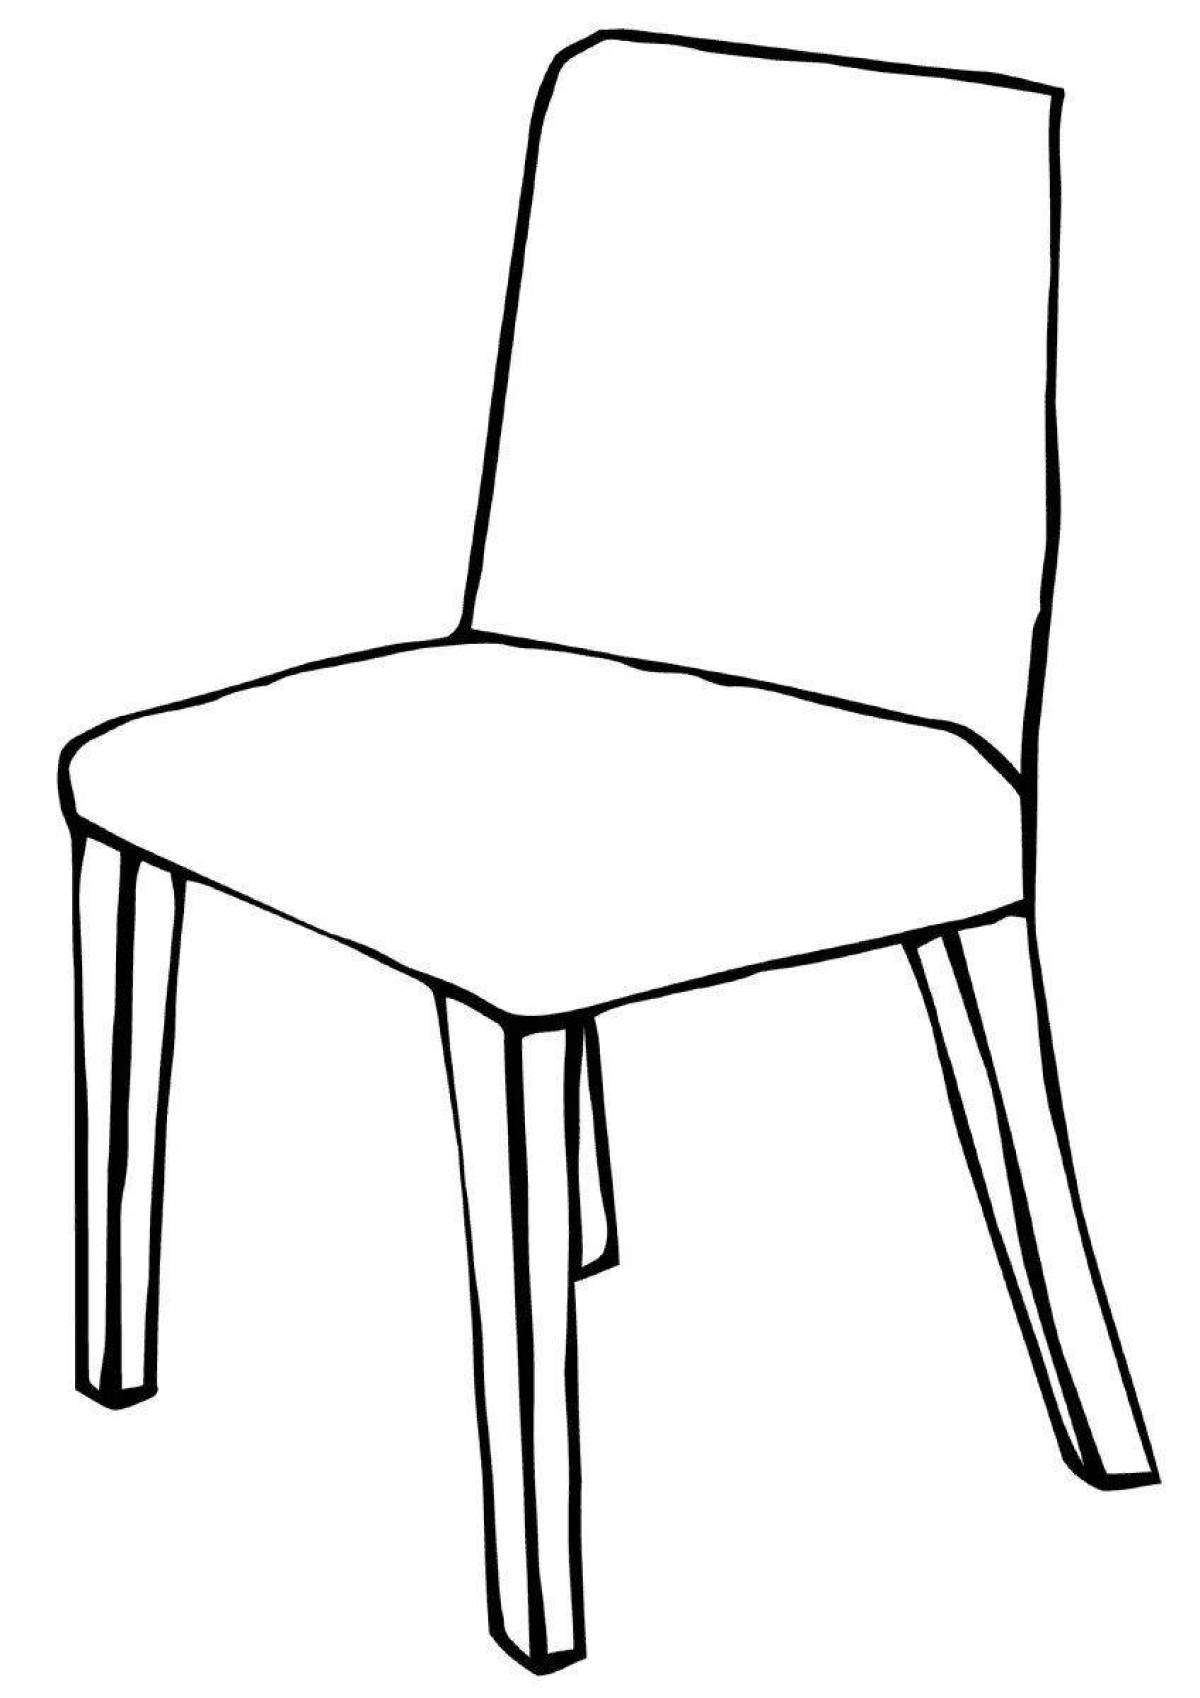 Coloring book nice chair for kids